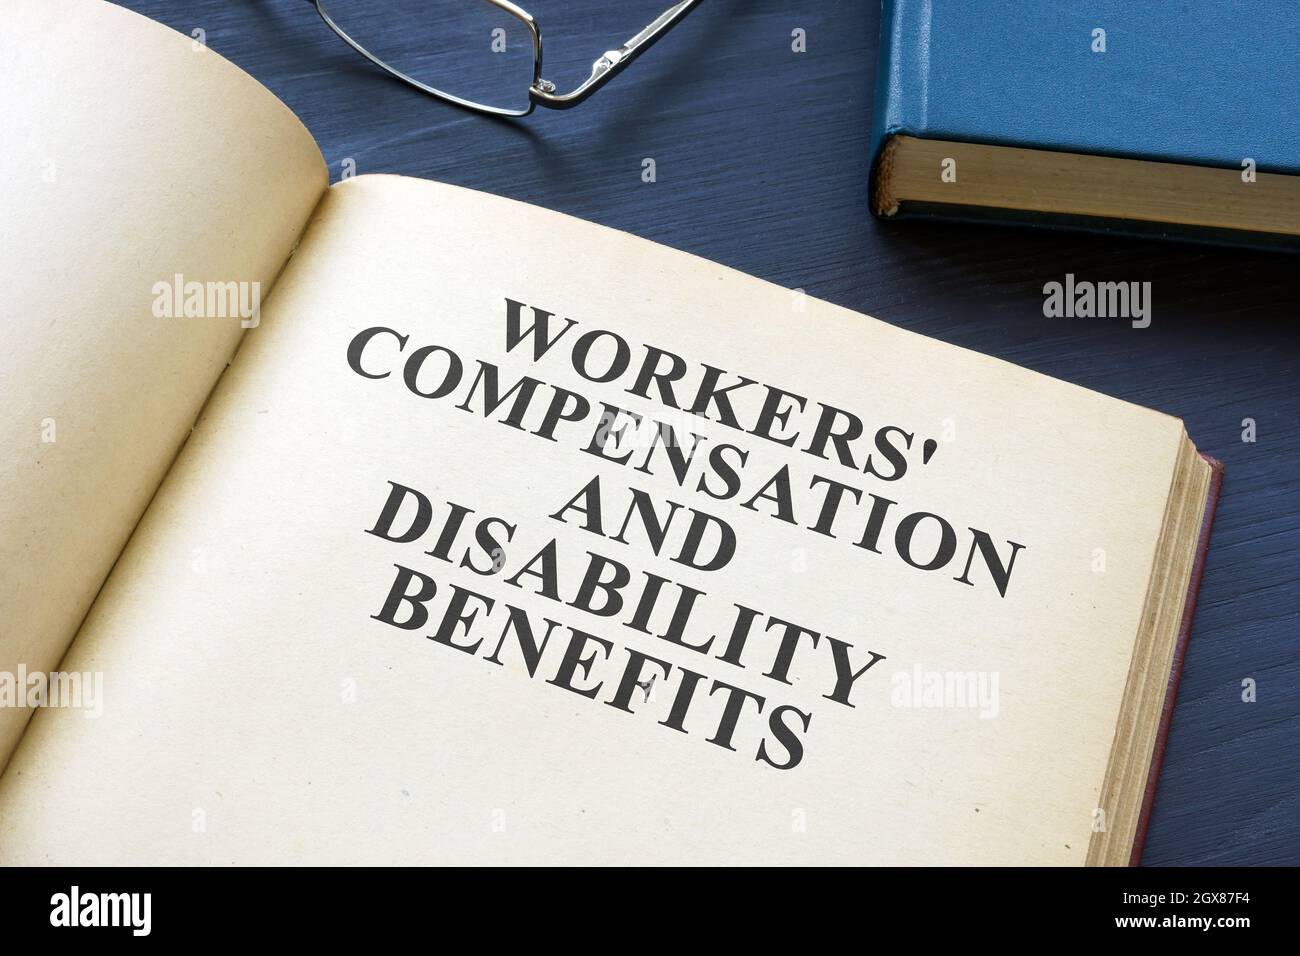 Open Workers Compensation and Disability Benefits Law Book. Stockfoto